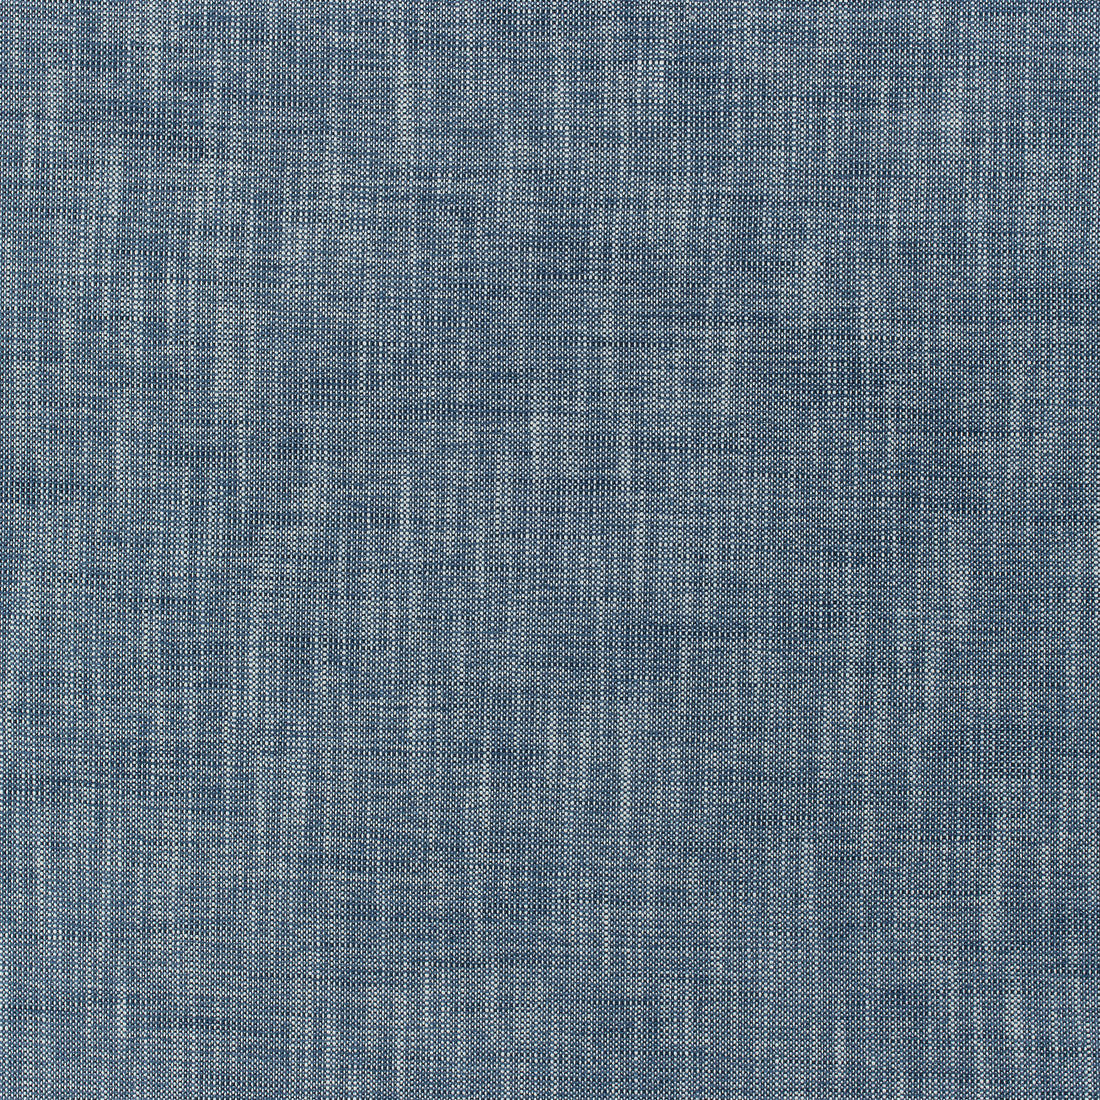 Bailey fabric in navy color - pattern number W80497 - by Thibaut in the Mosaic collection